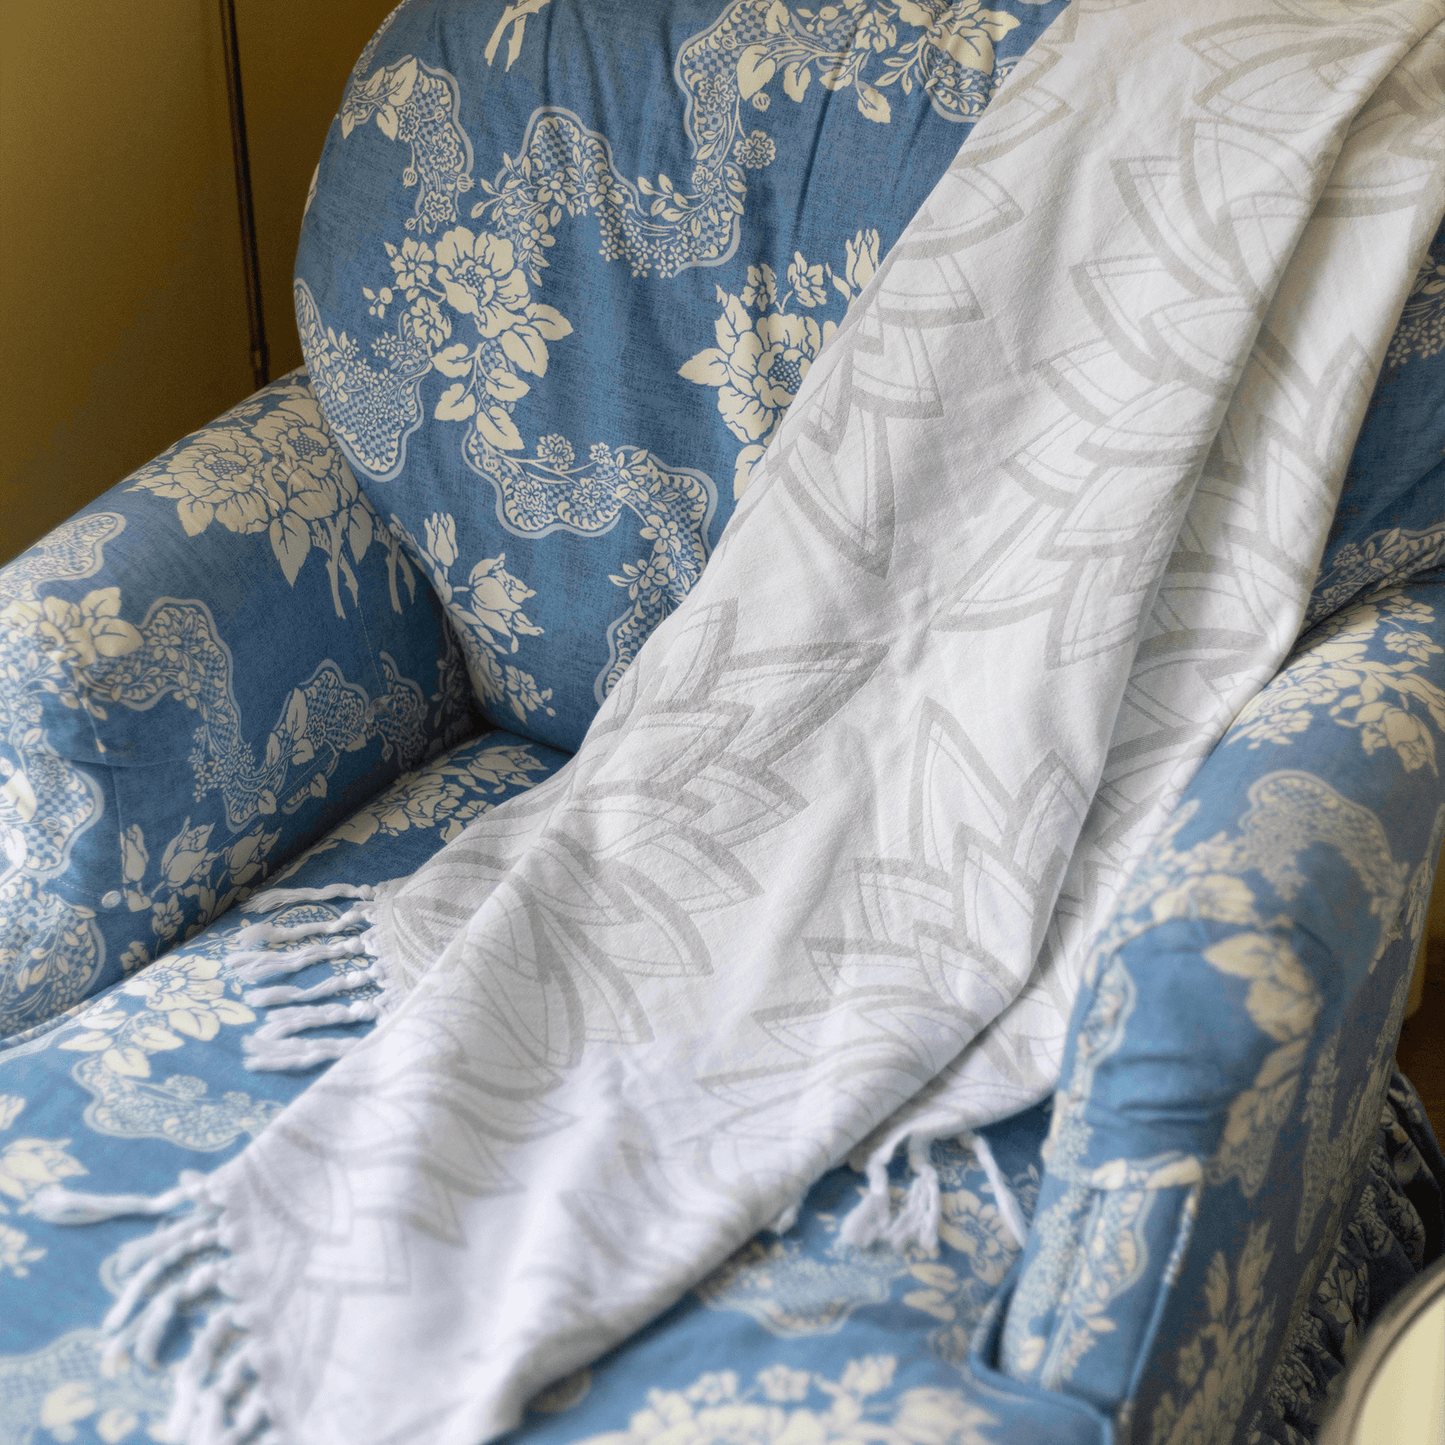 Grey and white Turkish towel on chaise lounge to be used as a light throw blanket